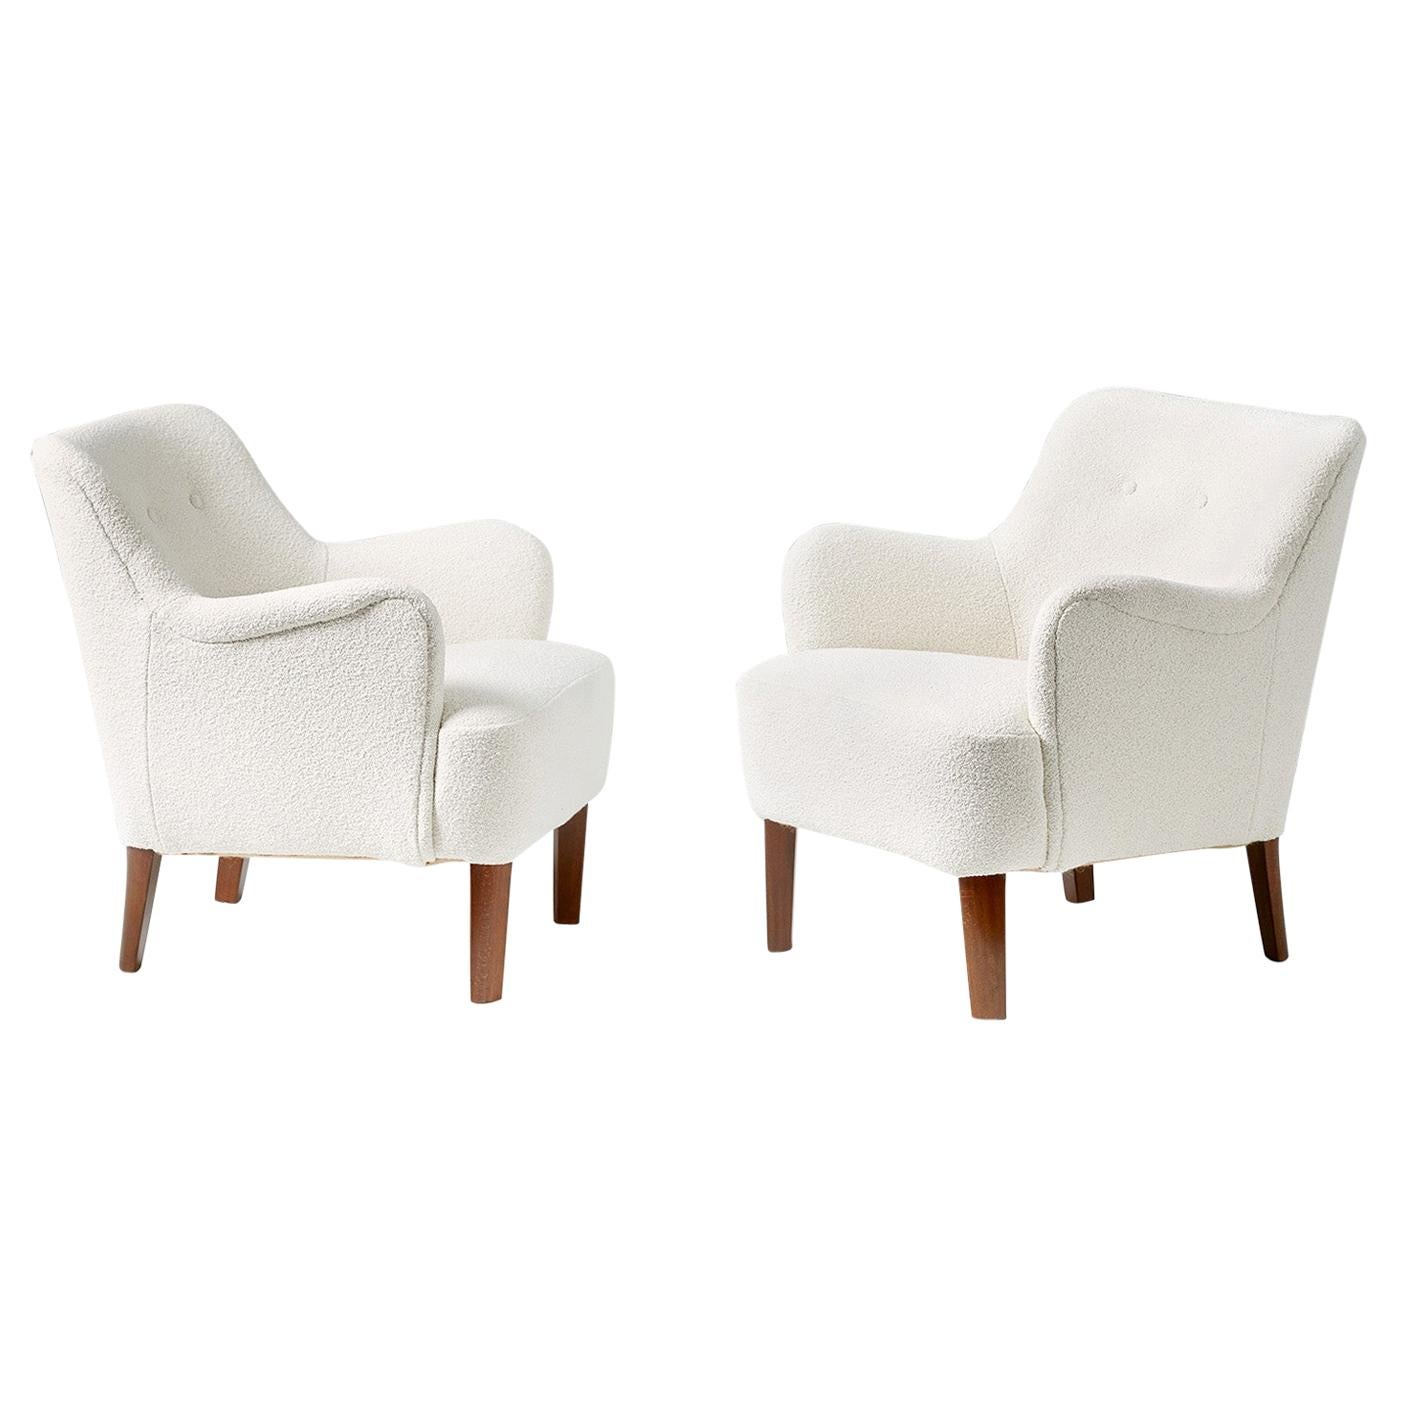 Peter Hvidt 1940s Pair of Boucle Armchairs for Fritz Hansen